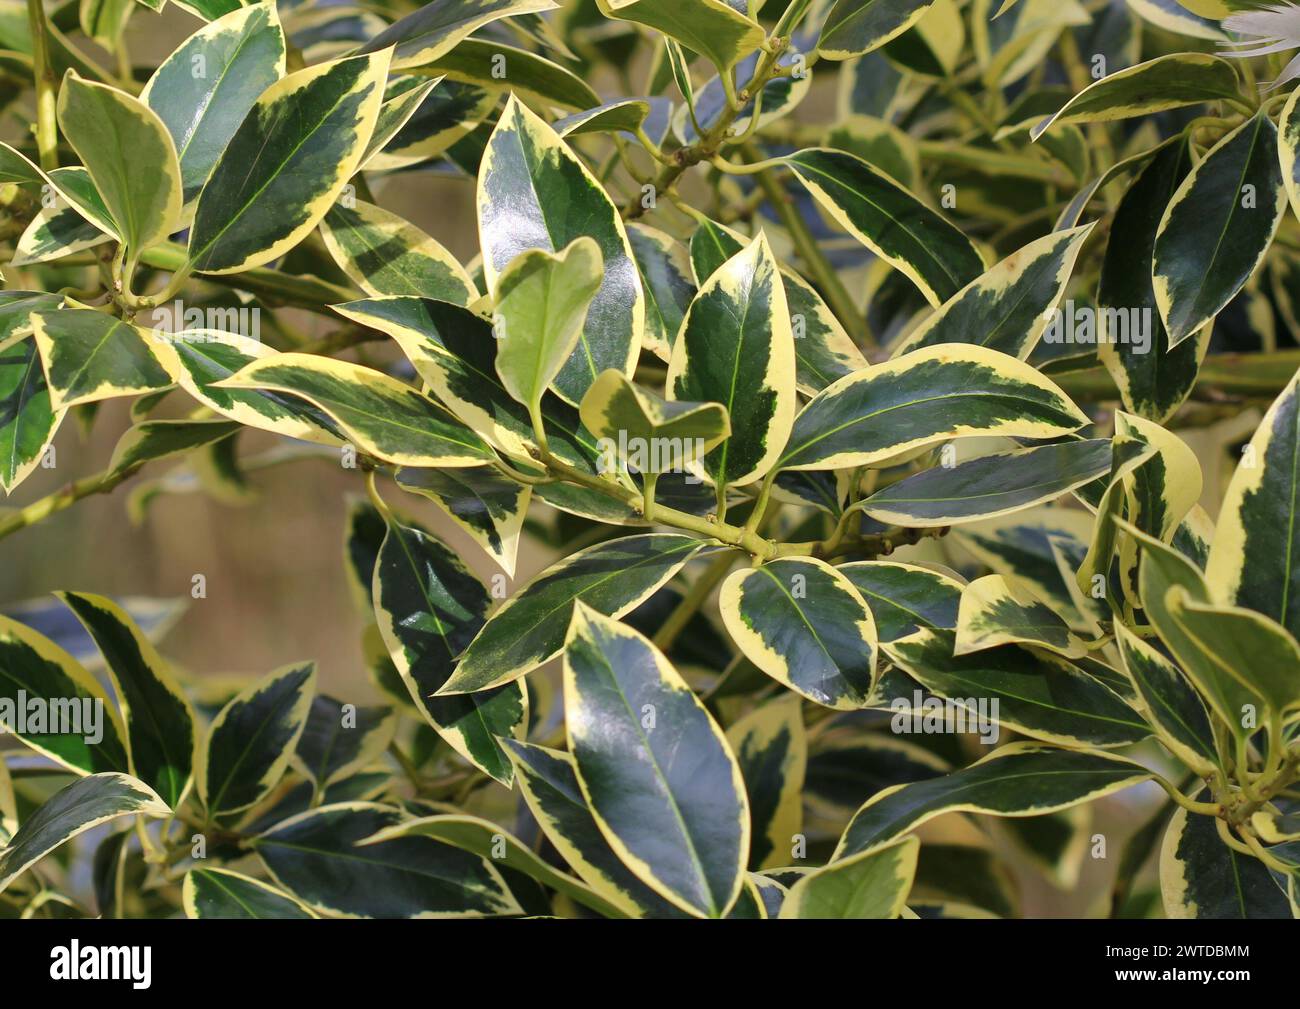 The variegated foliage of Ilex x altaclerensis 'Golden King', Holly. Stock Photo